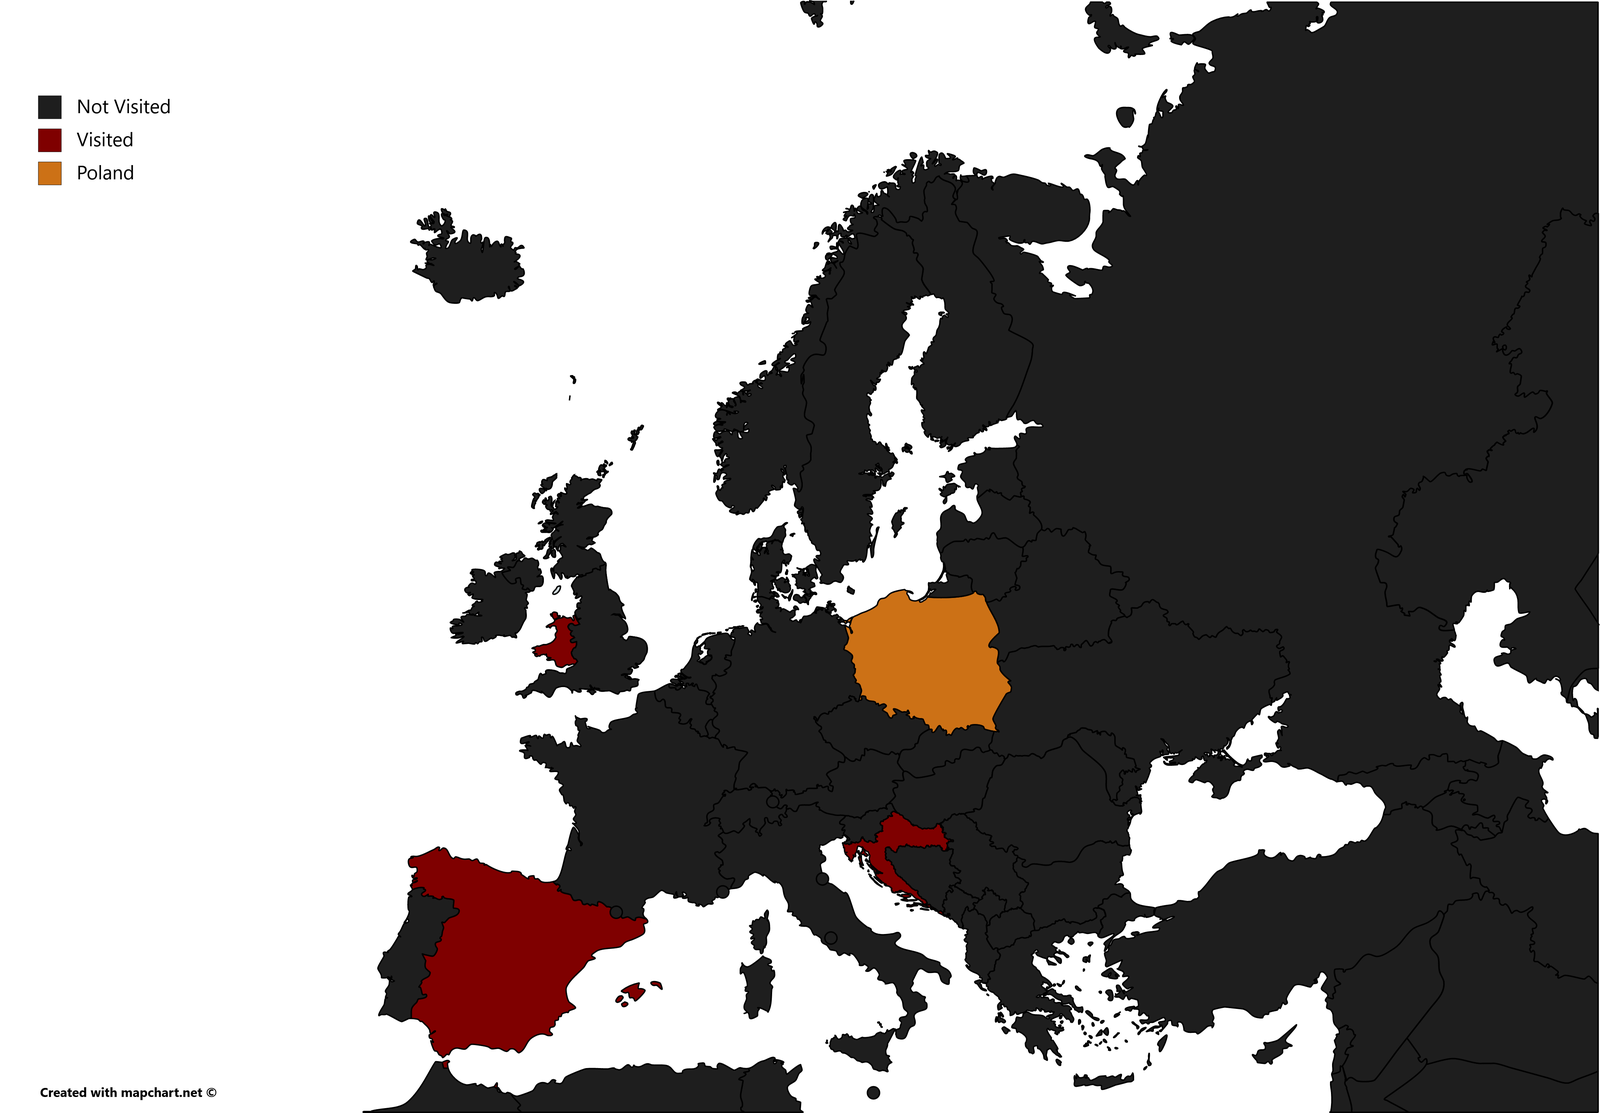 Poland highlighted on the map of Europe